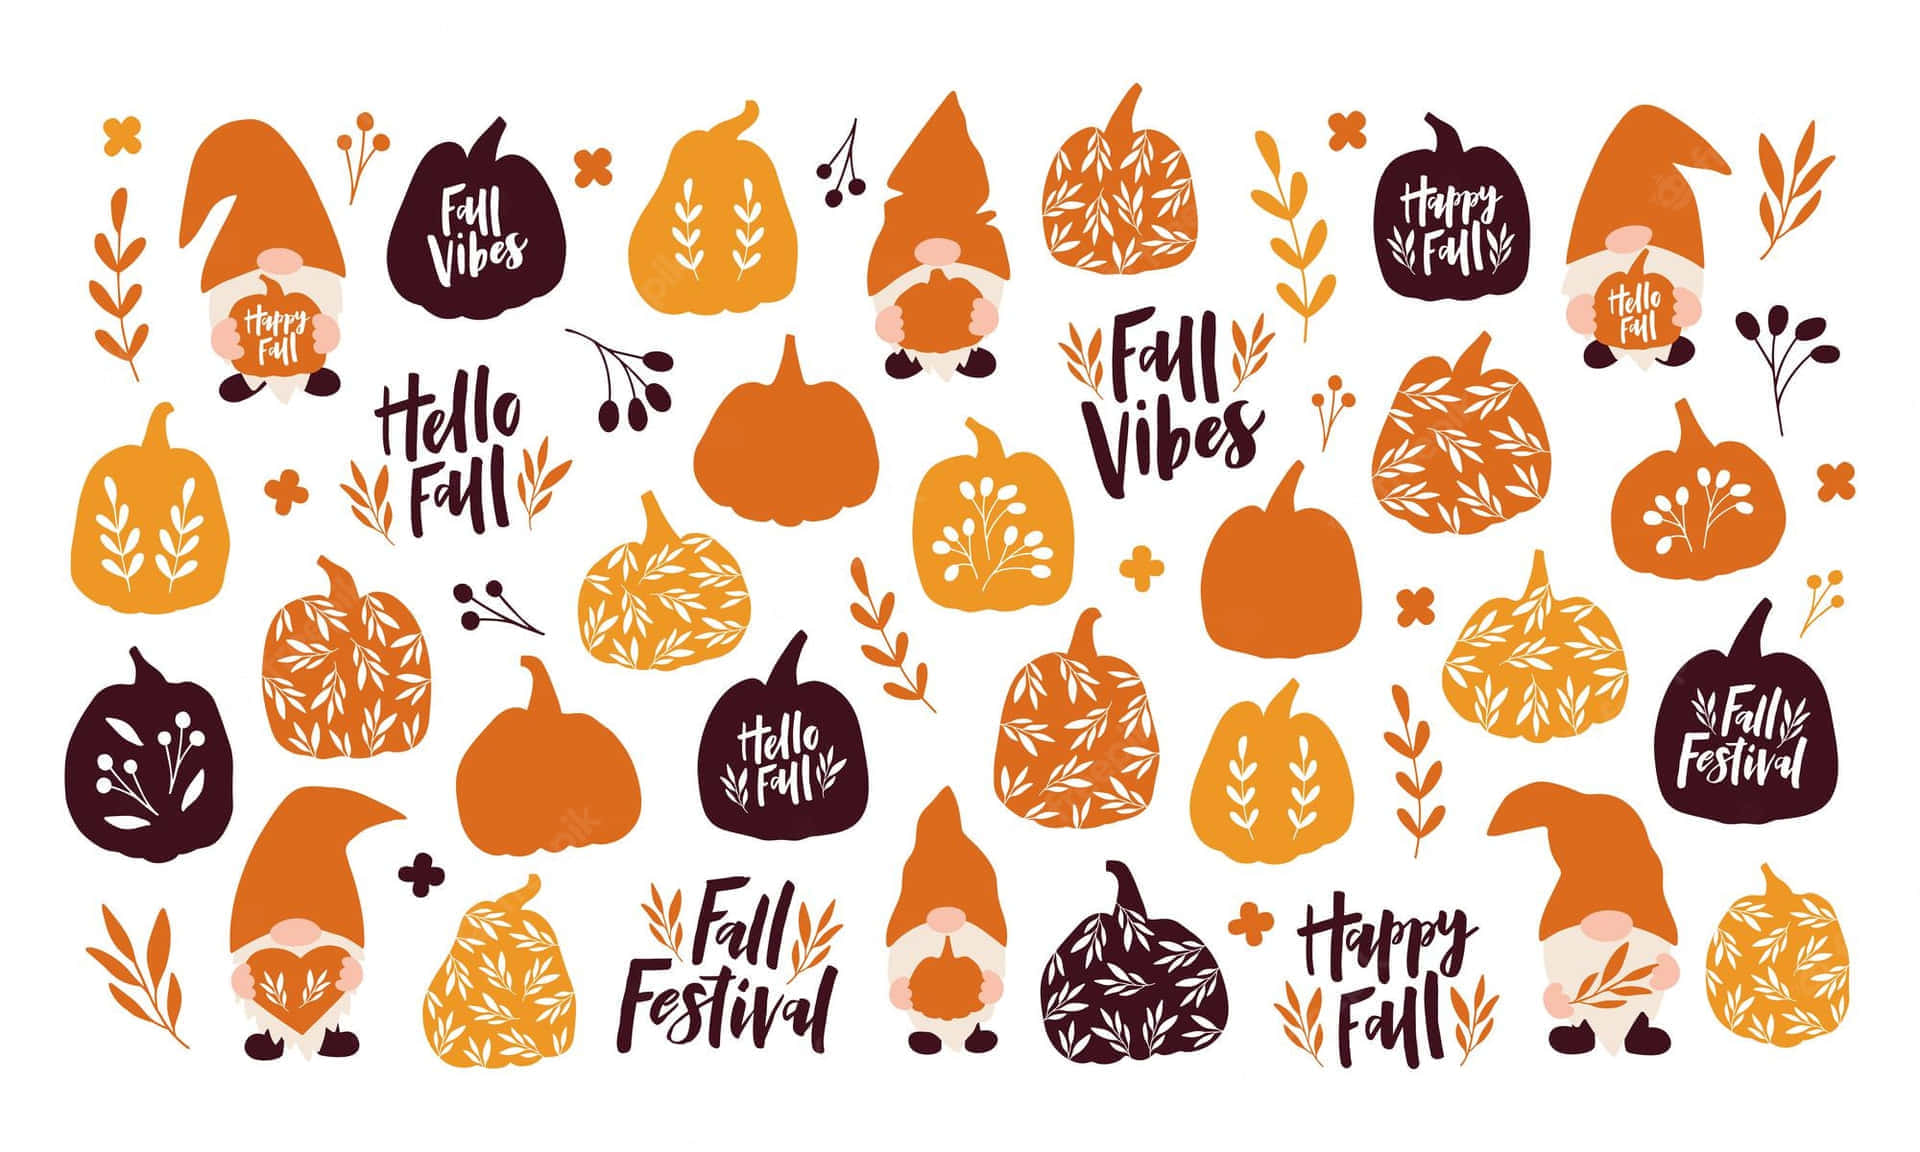 Vibrant Fall Festival in a Picturesque Rural Setting Wallpaper